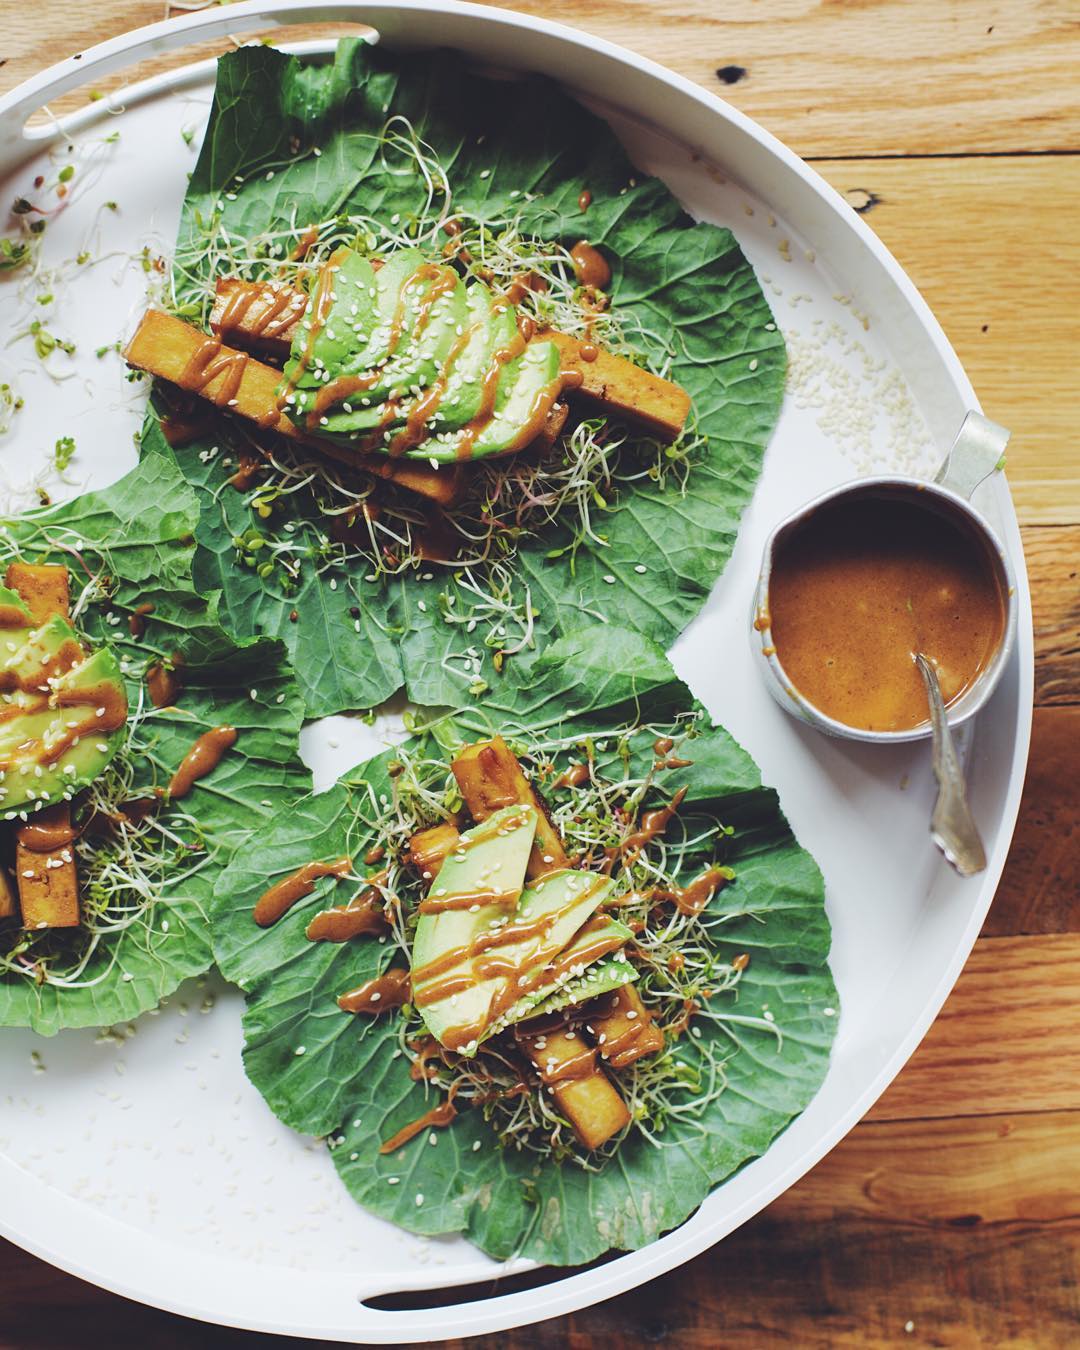 Took_an_old_recipe__improved_upon_it__and_came_out_with_these_Crispy_Orange_Tofu_Collard_Wraps_with_Peanut_Sauce._This_recipe_will_make_you_glad_you_are_a_human_who_is_alive_and_has_tastebuds.____celebratehealthier_by_brewinghappiness.jpg